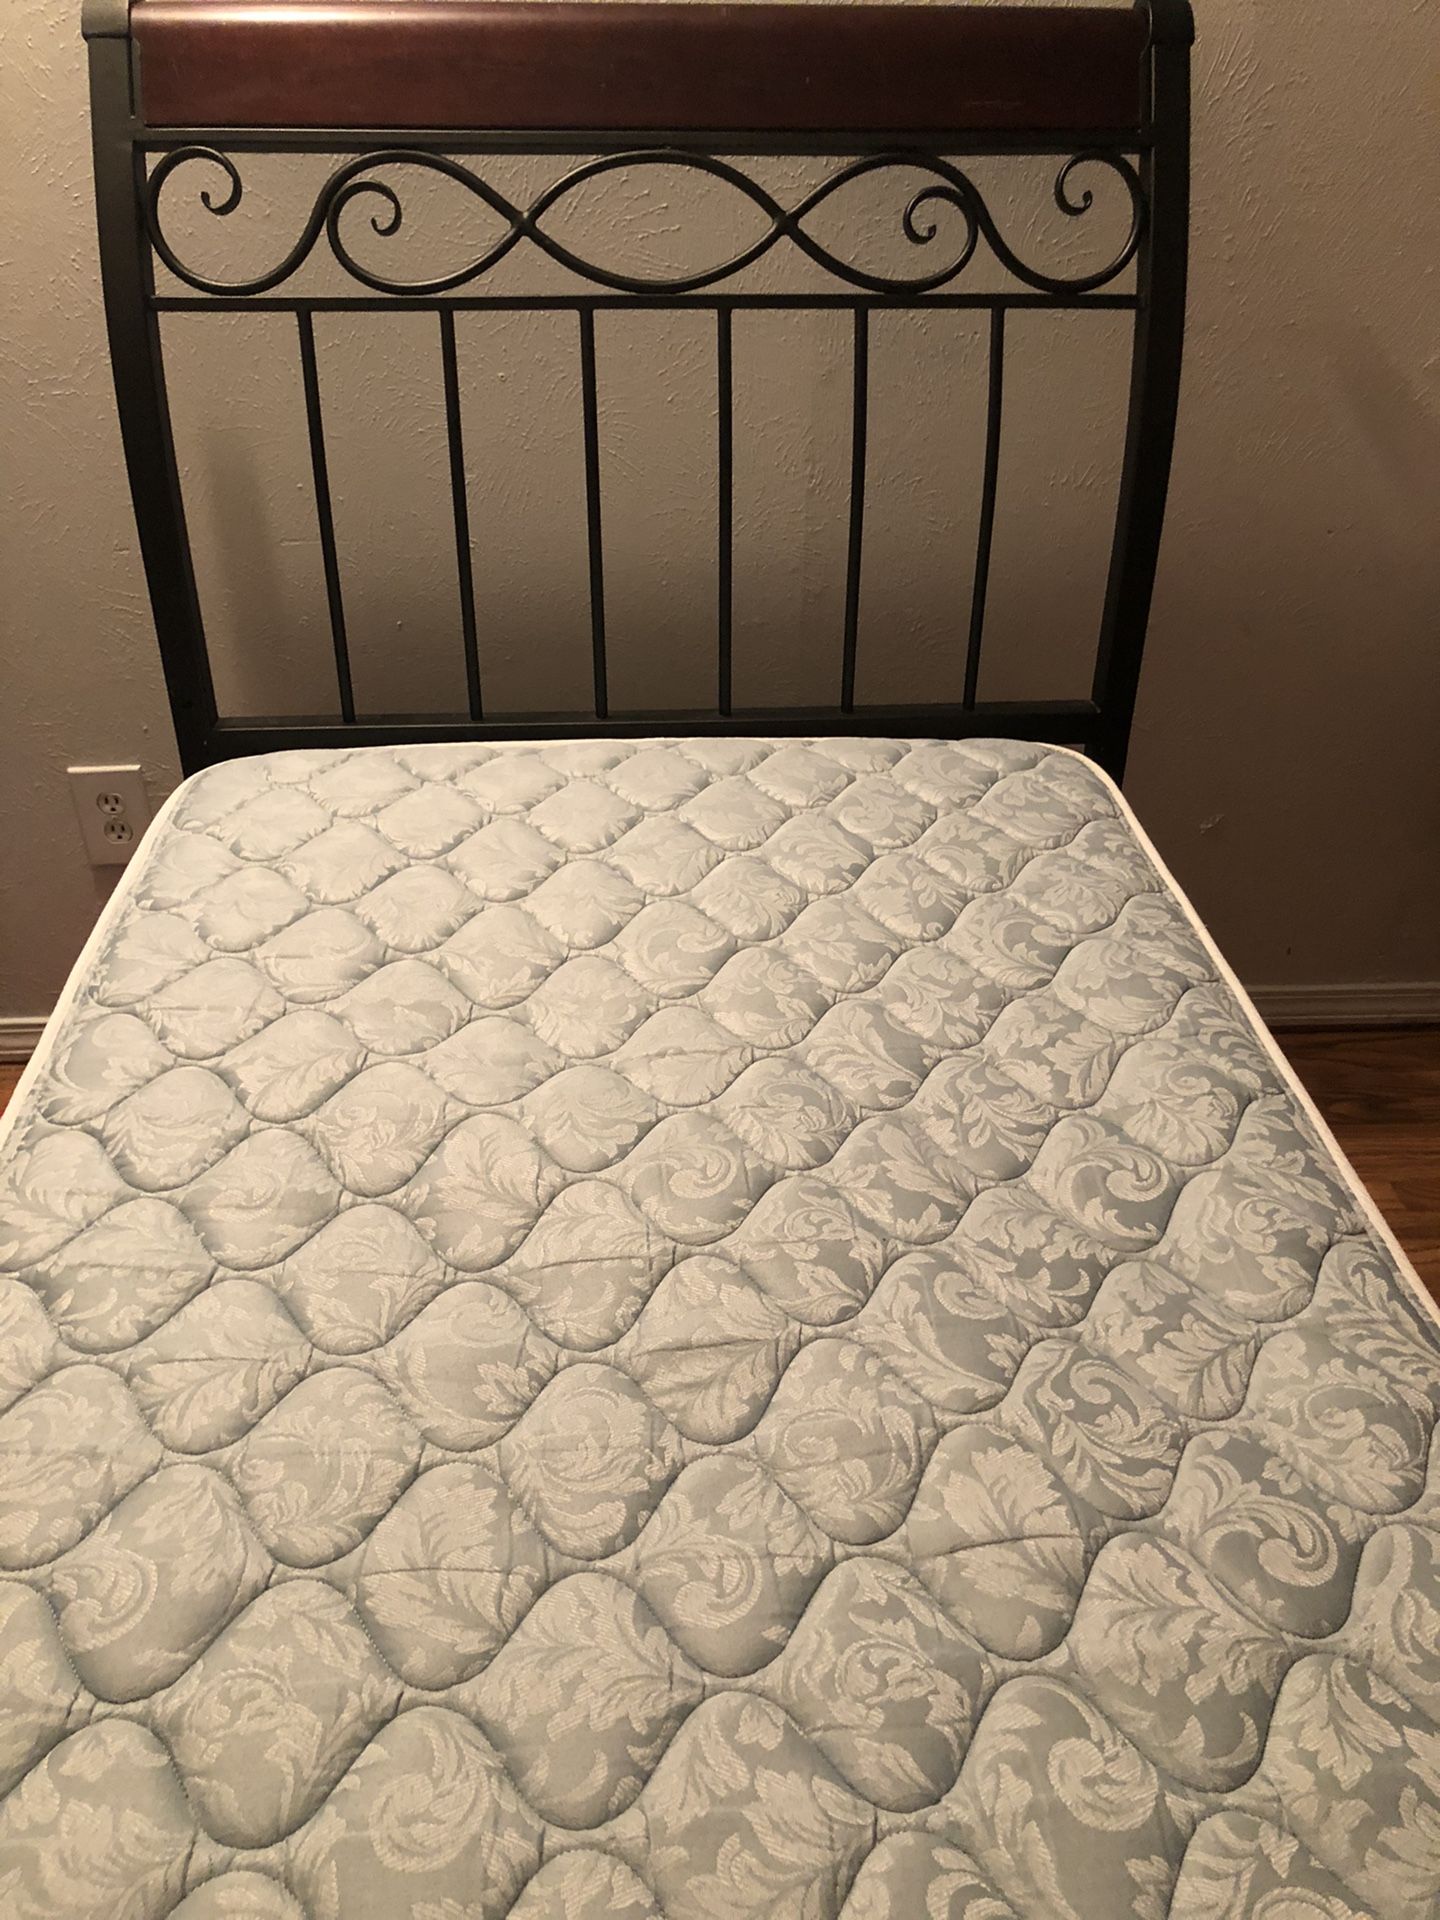 Twin bed frame and mattress